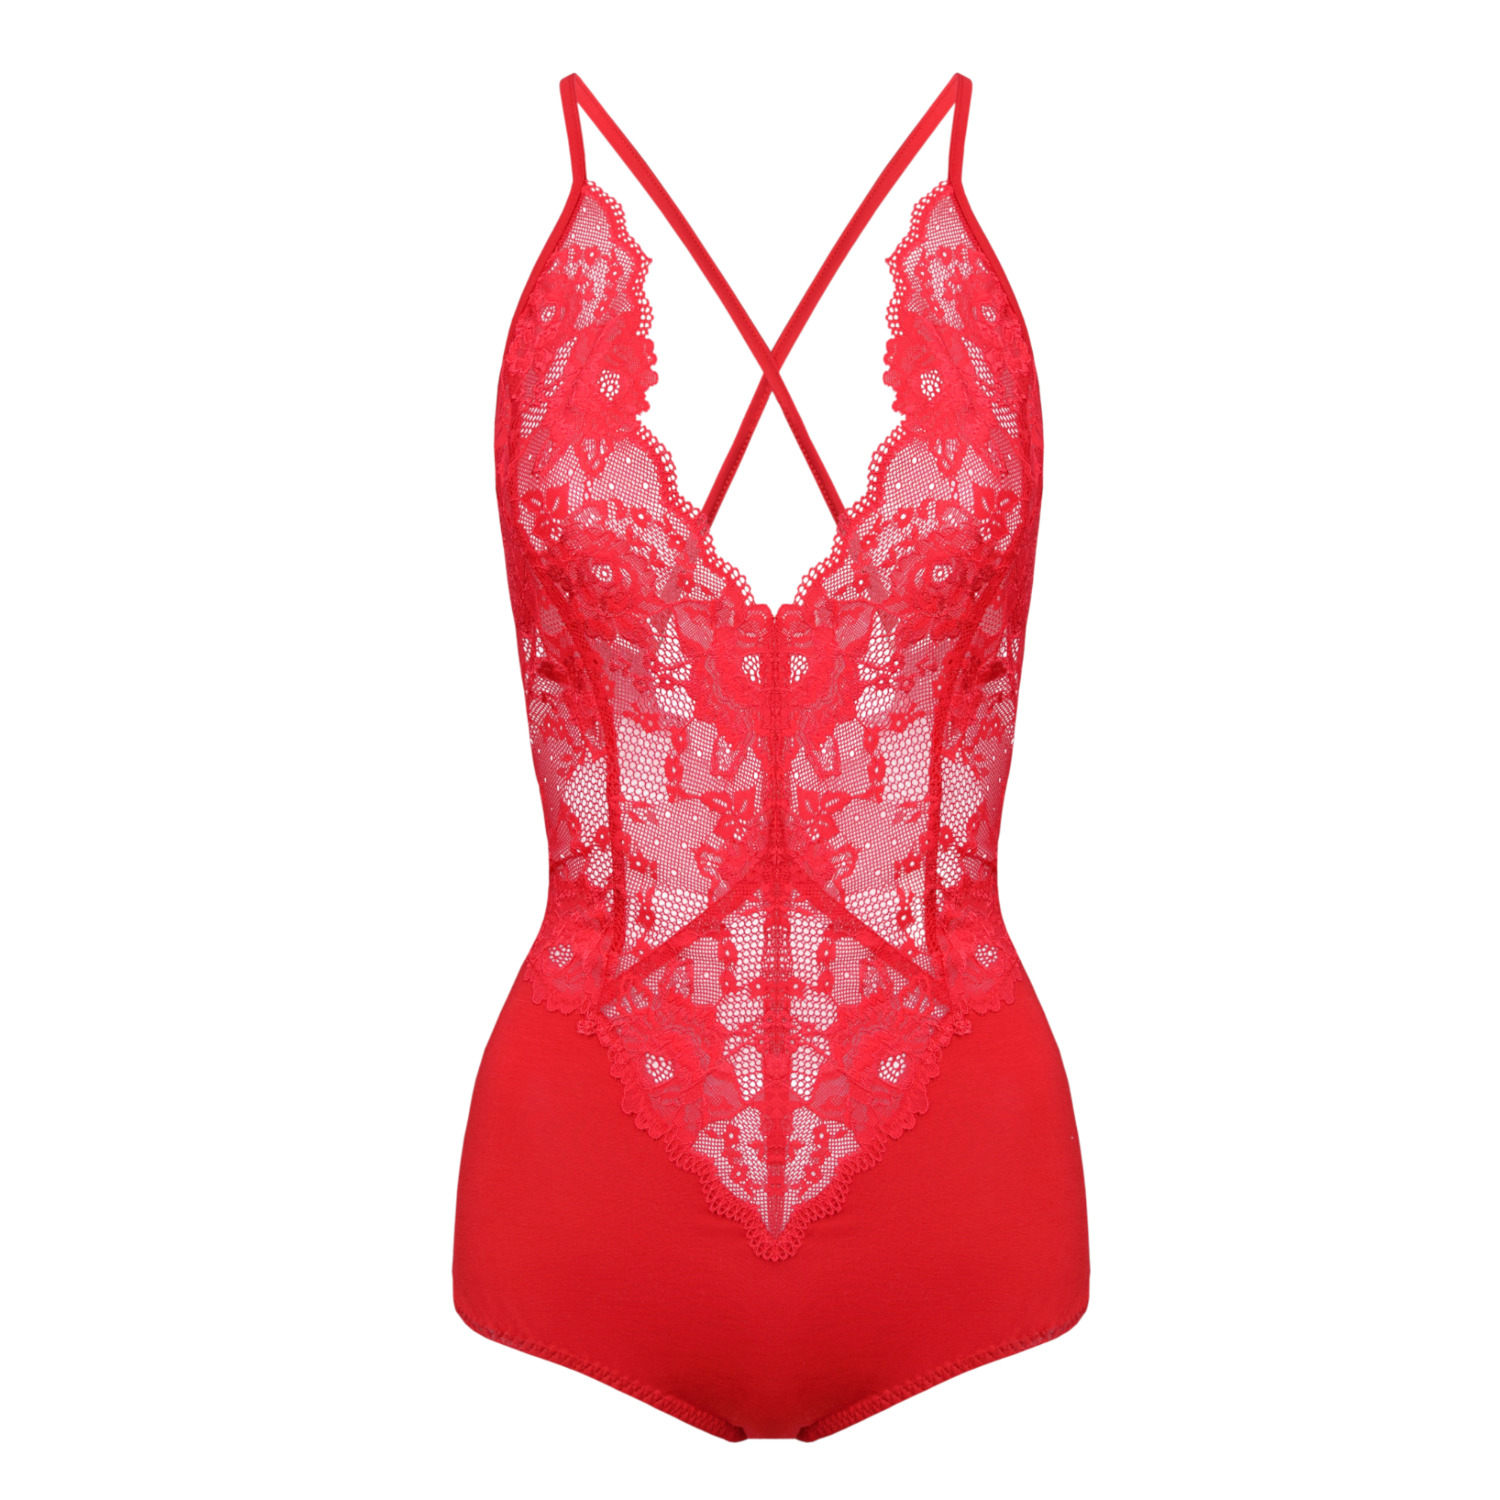 Women’s Lace Intimate Bodysuit - Red Small Oh!Zuza Night & Day